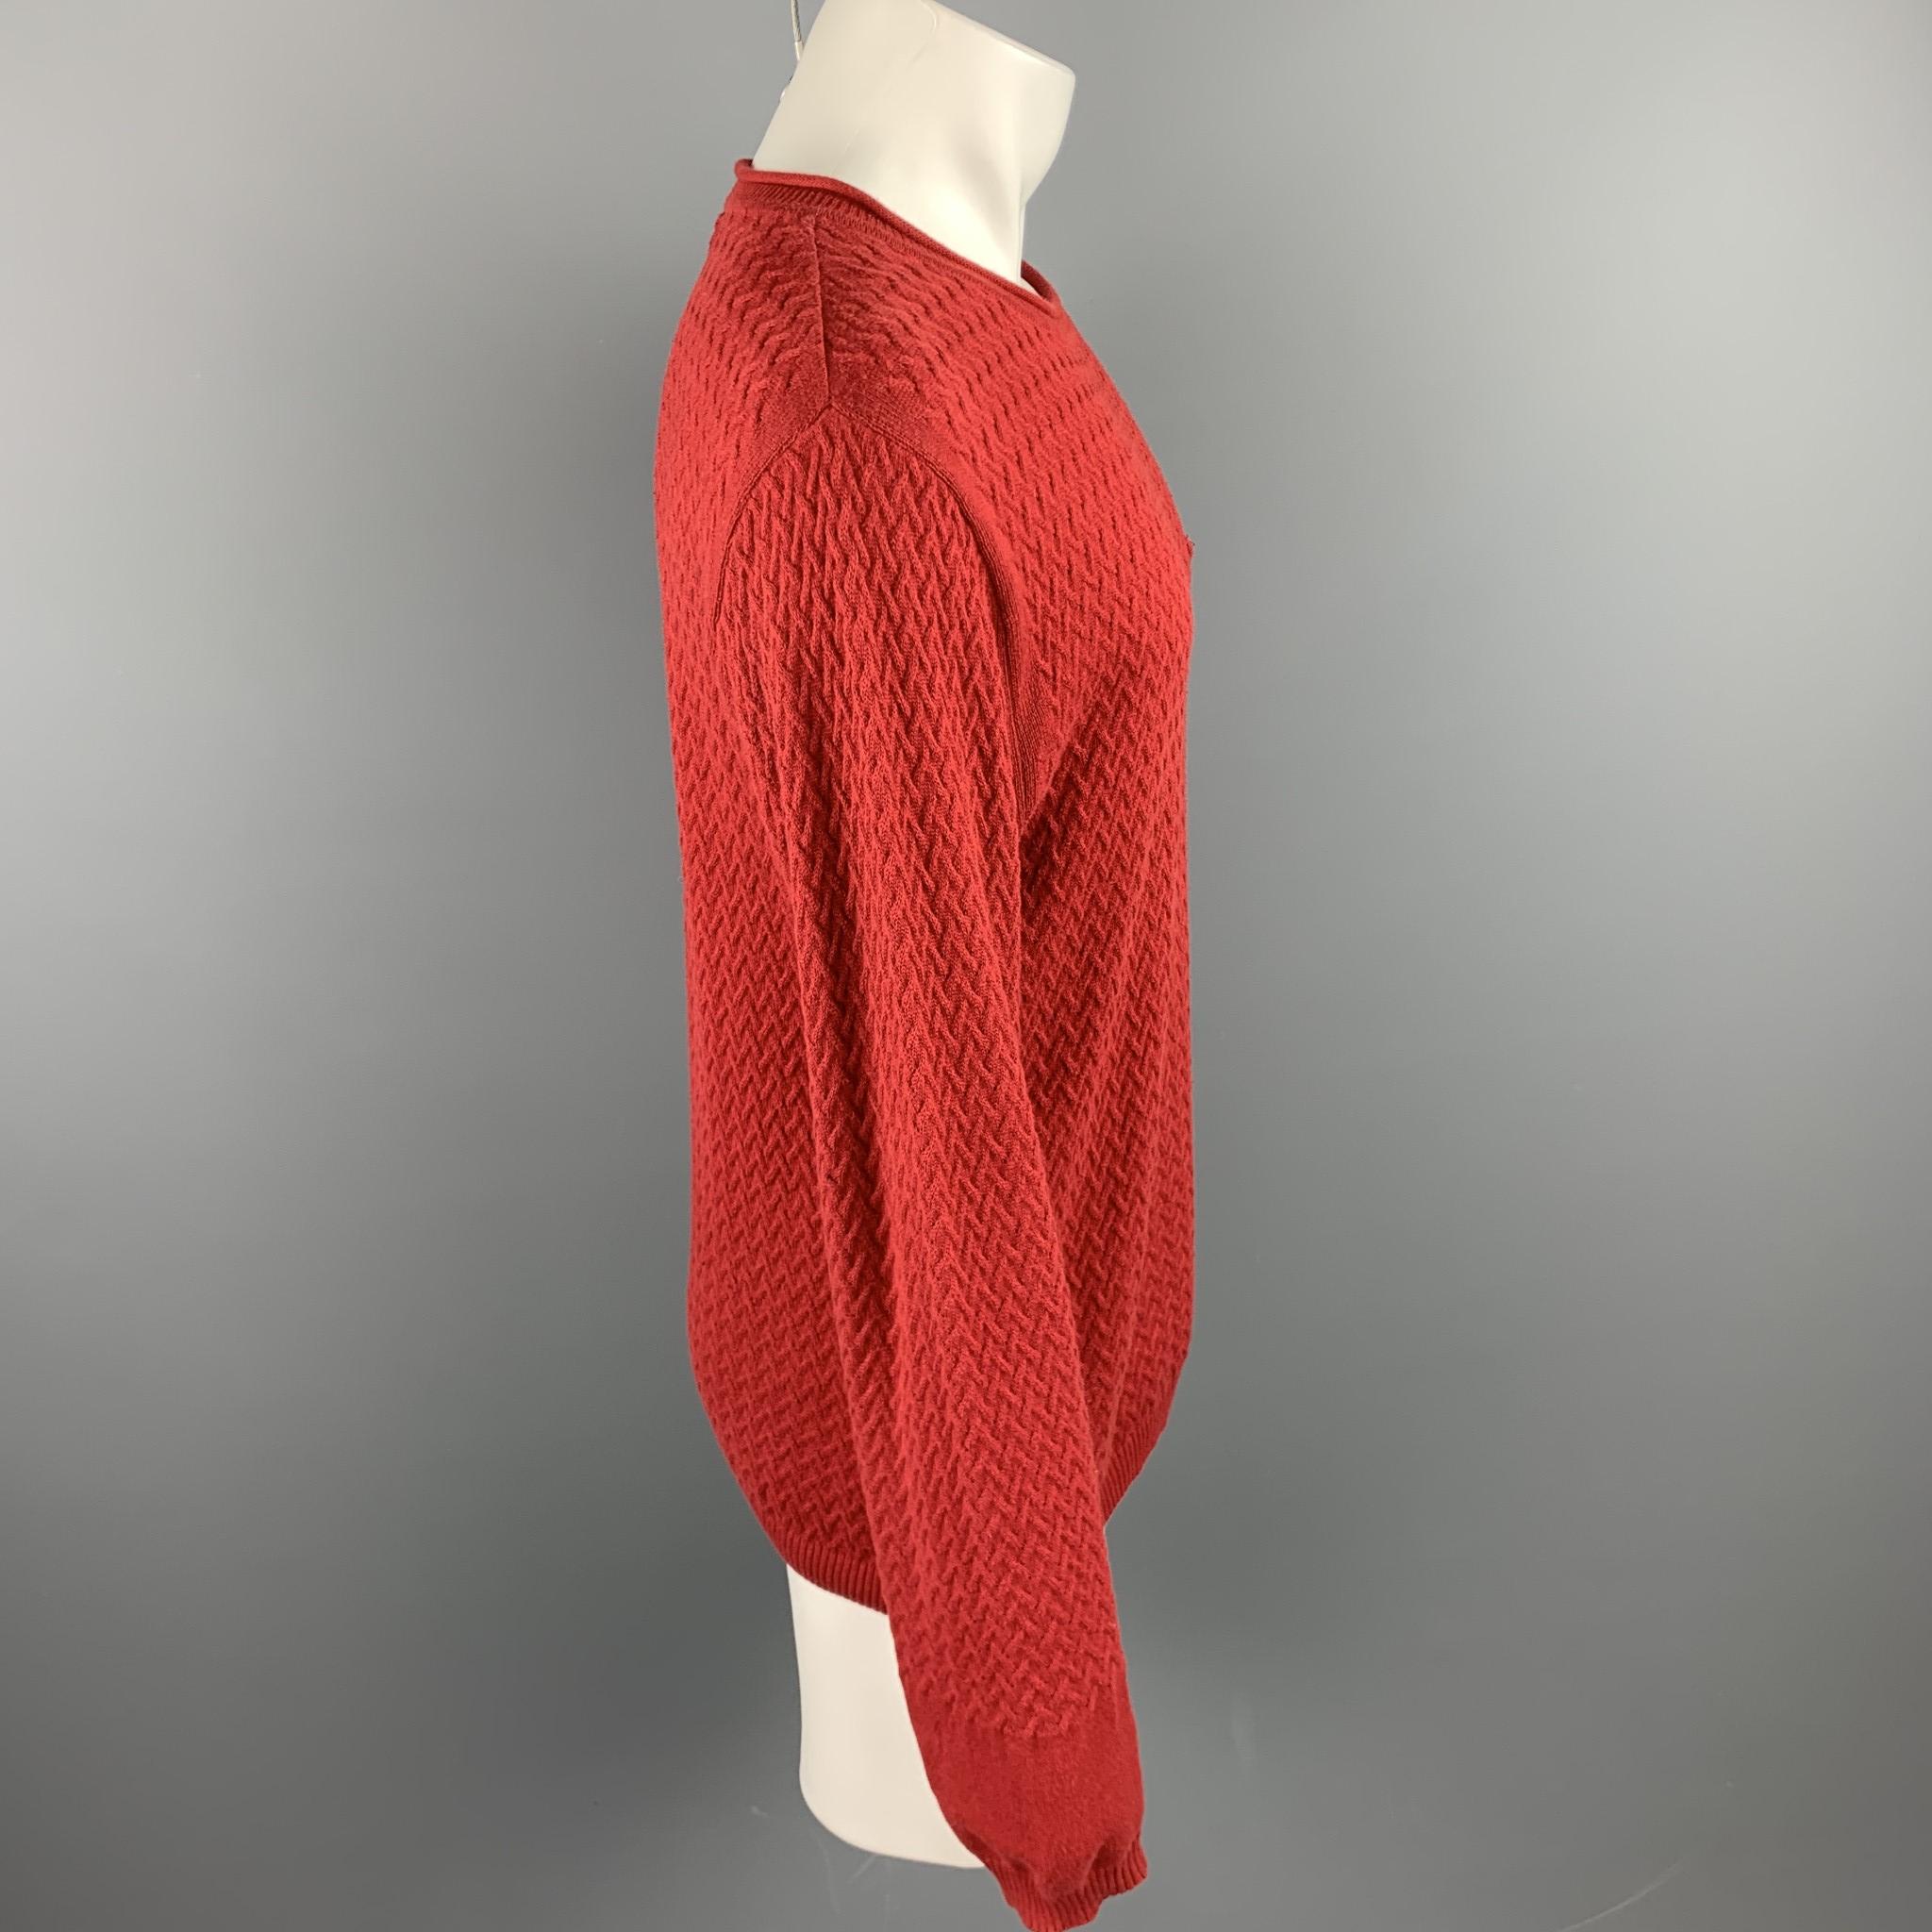 OLIVER SPENCER pullover comes red knitted cotton featuring a crew-neck and a front pocket. Made in Portugal.

Very Good Pre-Owned Condition.
Marked: M

Measurements:

Shoulder: 20 in. 
Chest: 40 in. 
Sleeve: 28 in. 
Length: 27.5 in. 